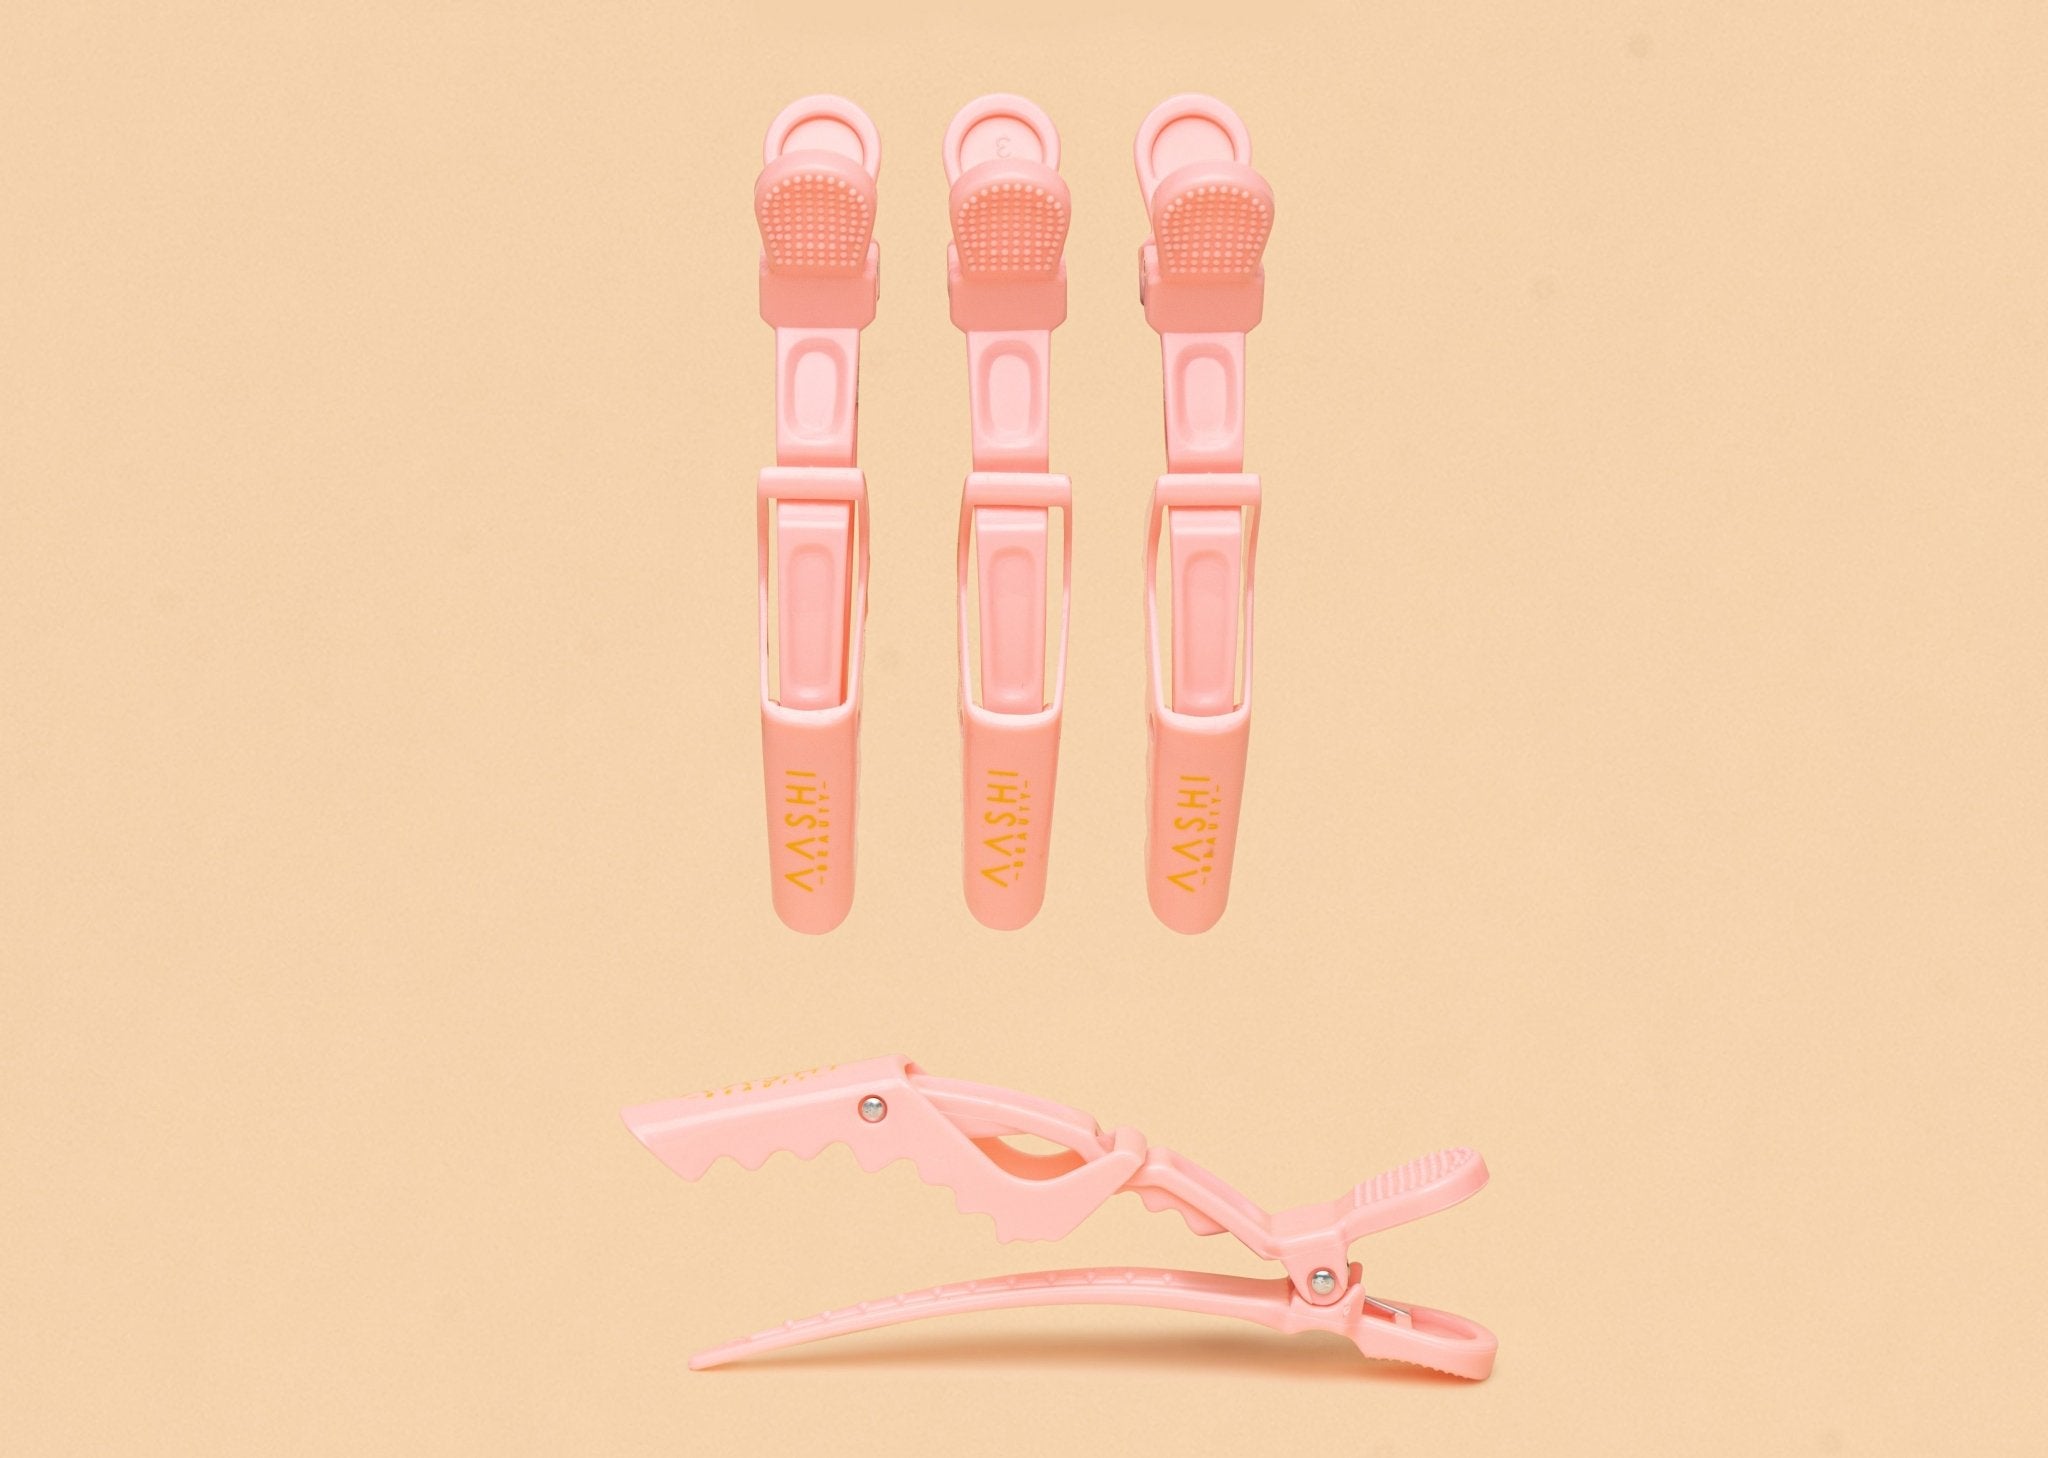 Aashi Beauty Girly Pink Claw Clips, Pack of 4 - Aashi Beauty